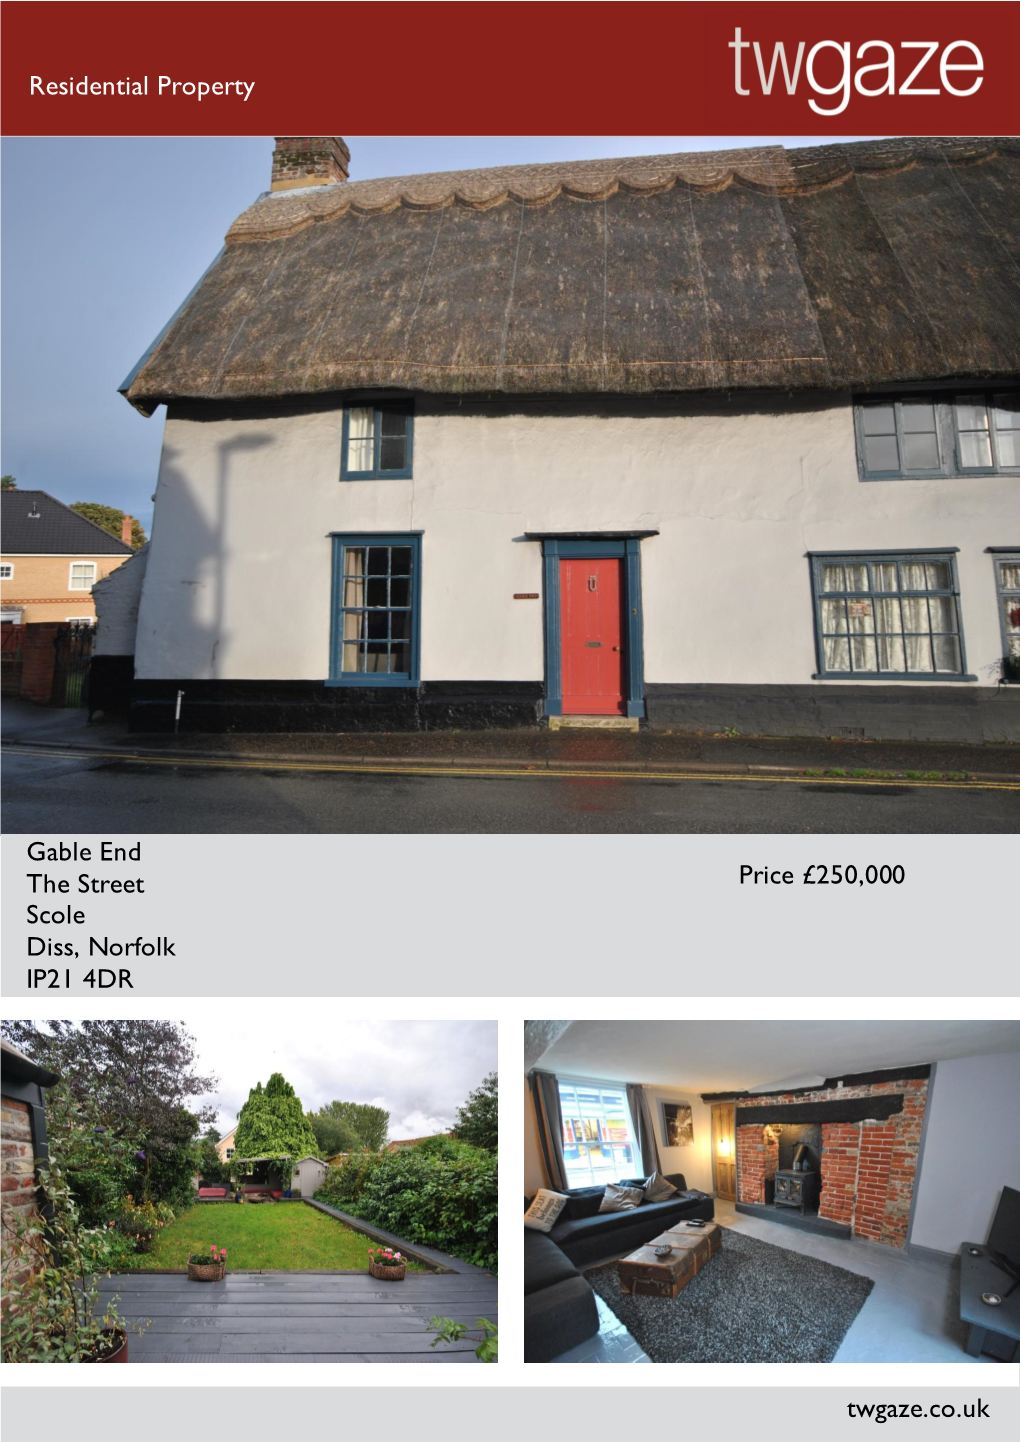 Residential Property Gable End the Street Scole Diss, Norfolk IP21 4DR Price £250,000 Twgaze.Co.Uk